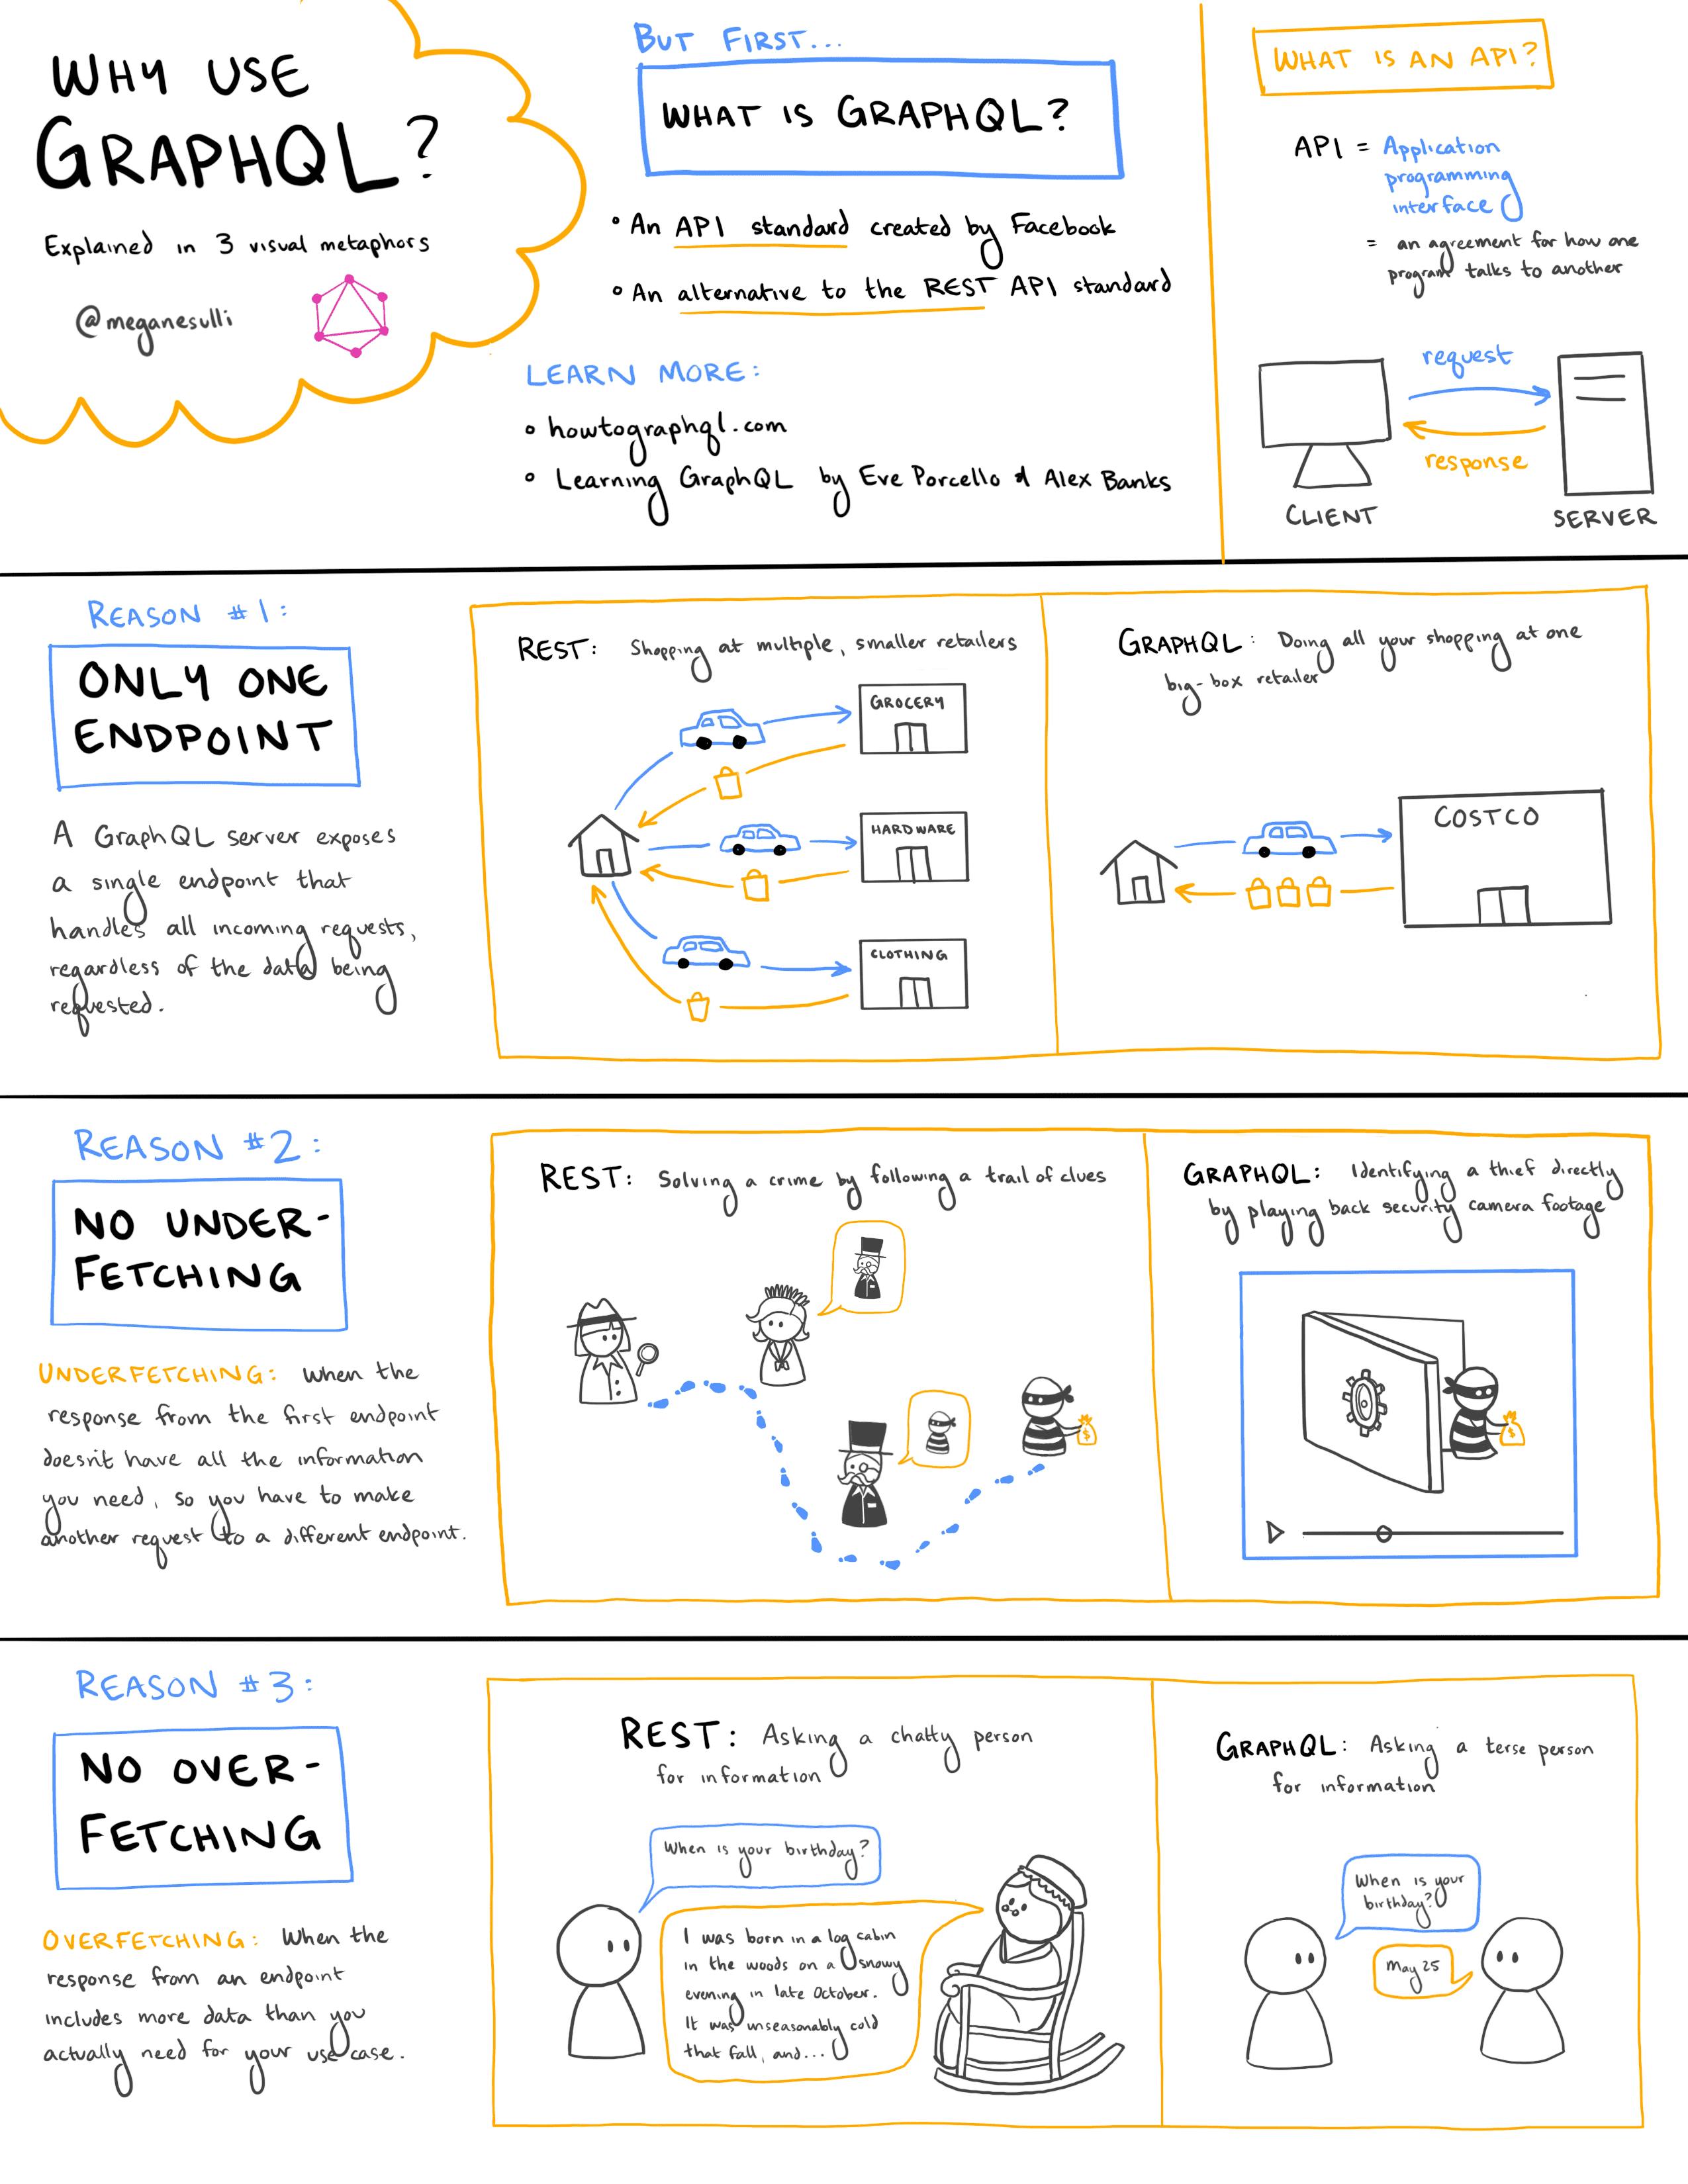 A sketchnote about why to use GraphQL